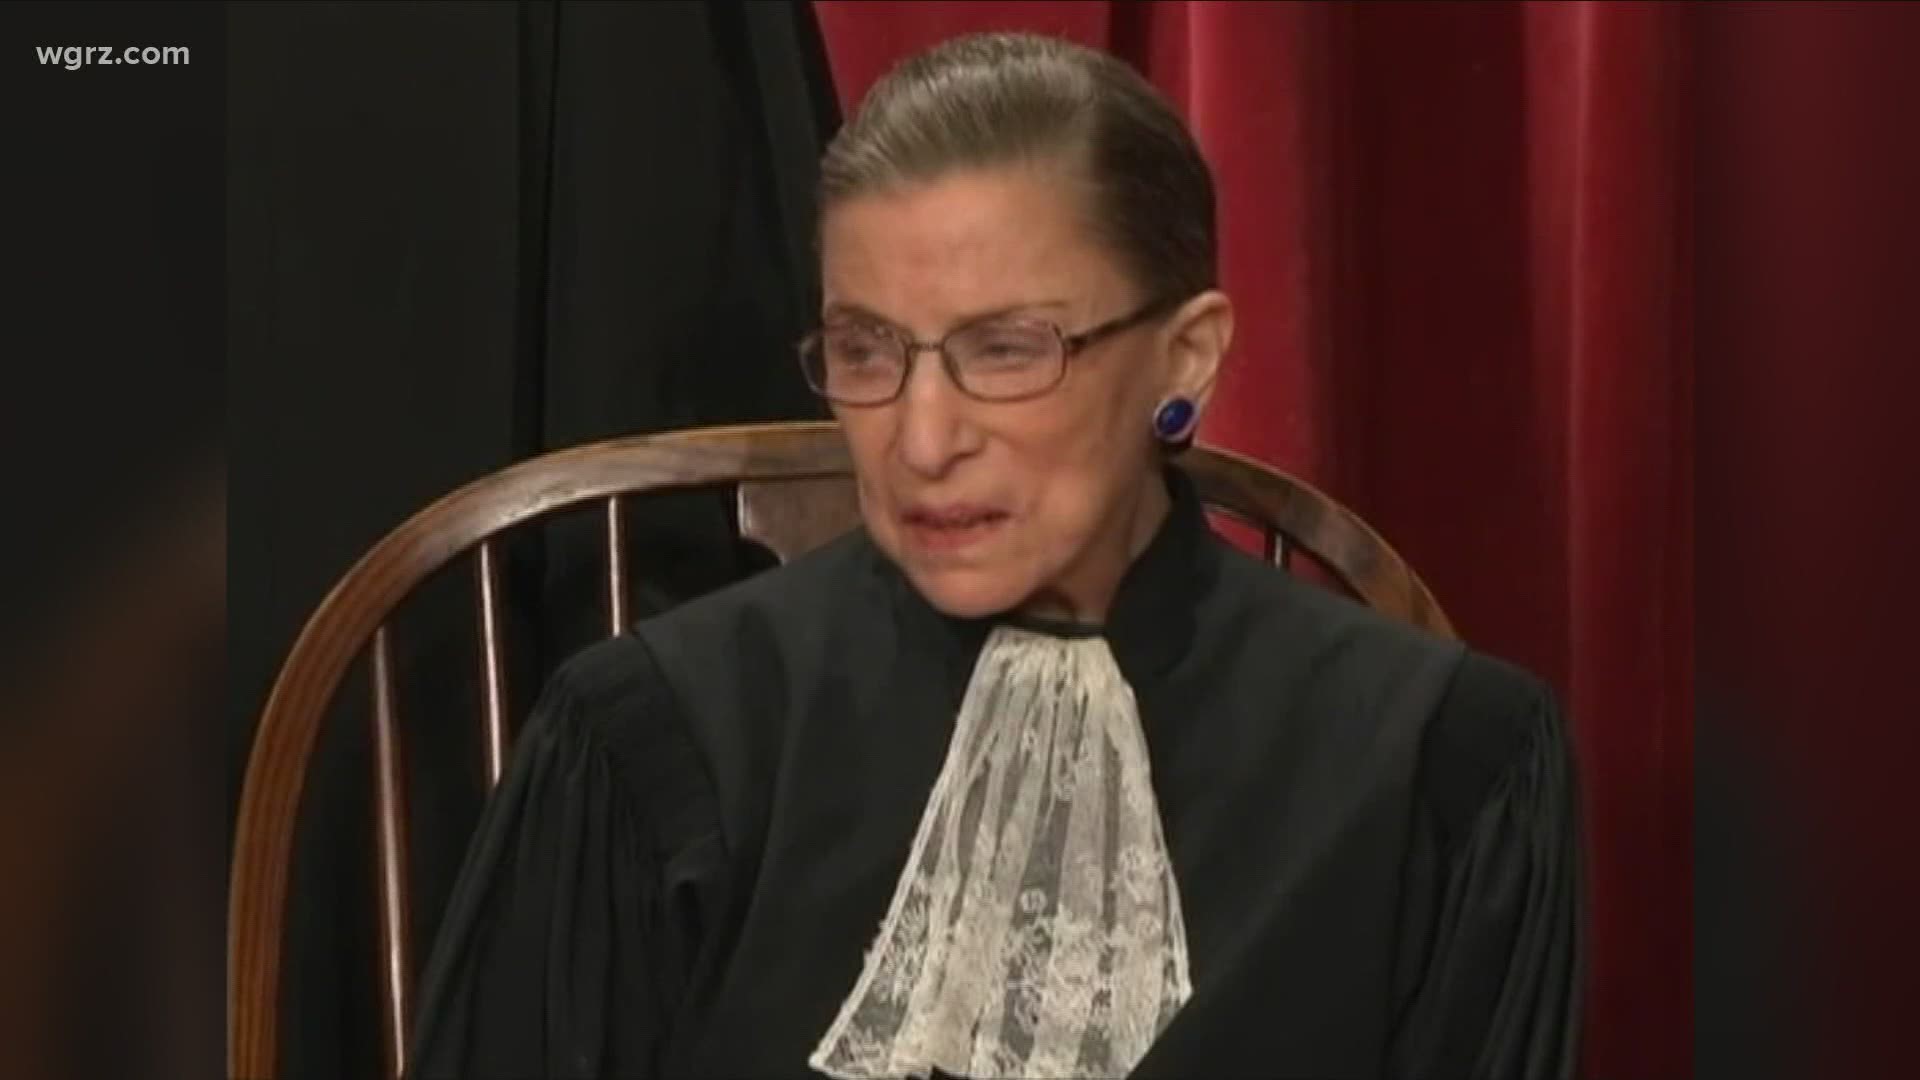 Supreme Court Justice Ruth Bader Ginsburg died Friday night from complications of metastatic pancreatic cancer.